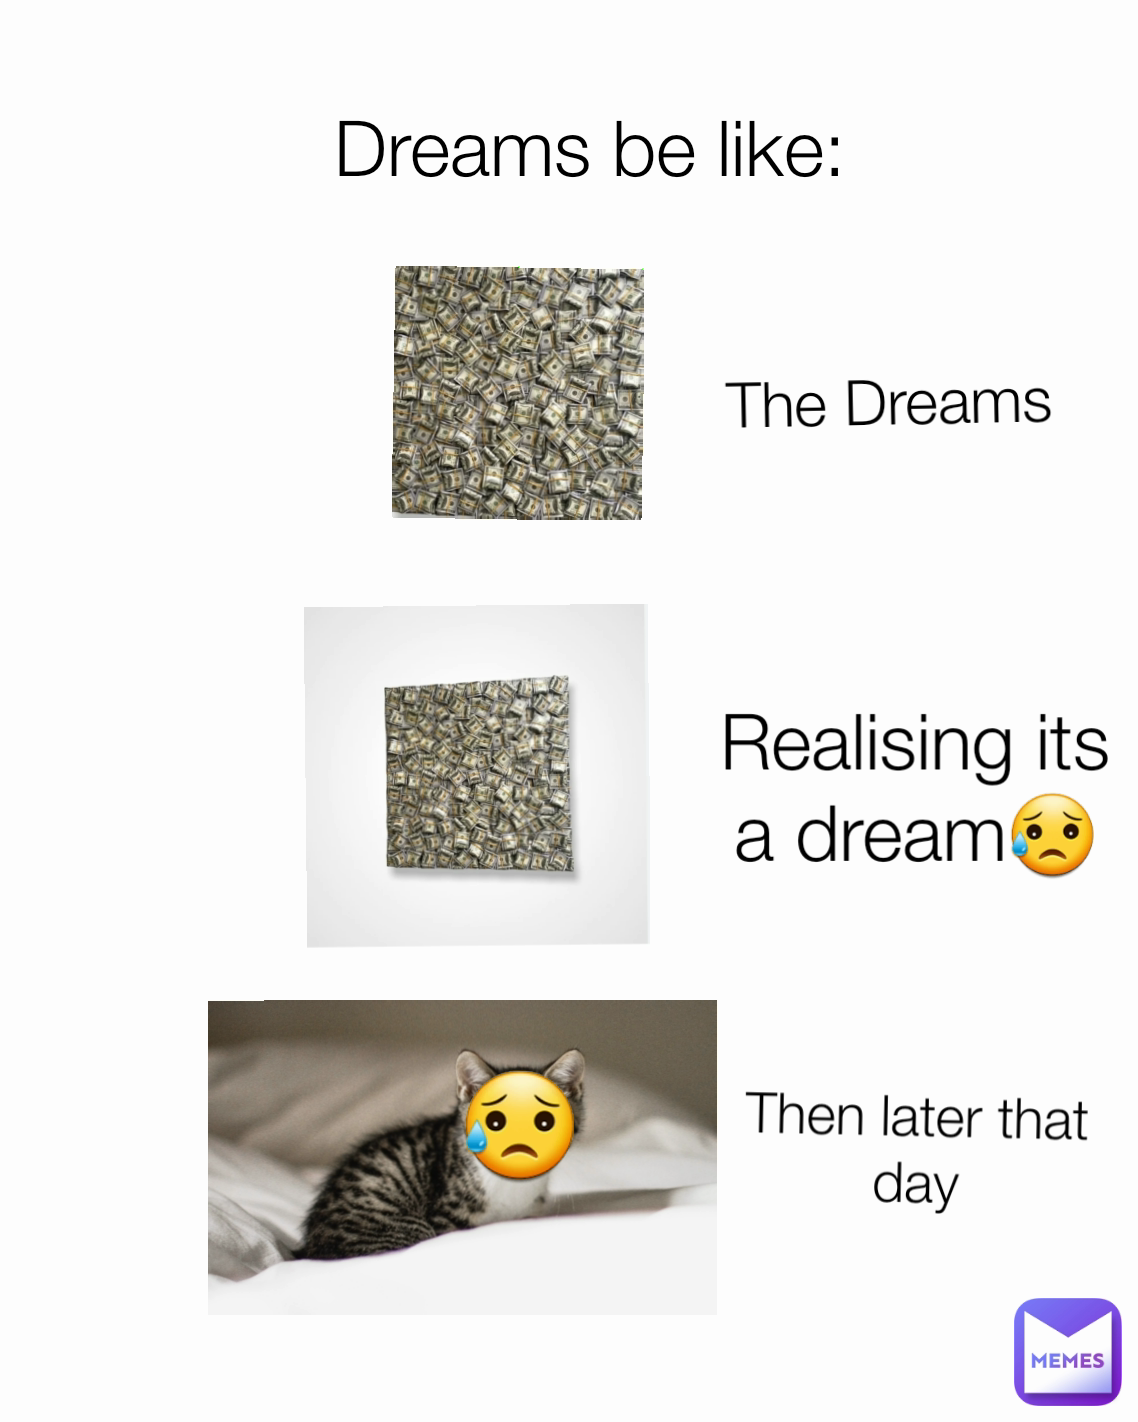 The Dreams Dreams be like: Realising its a dream😥 Then later that day 😥